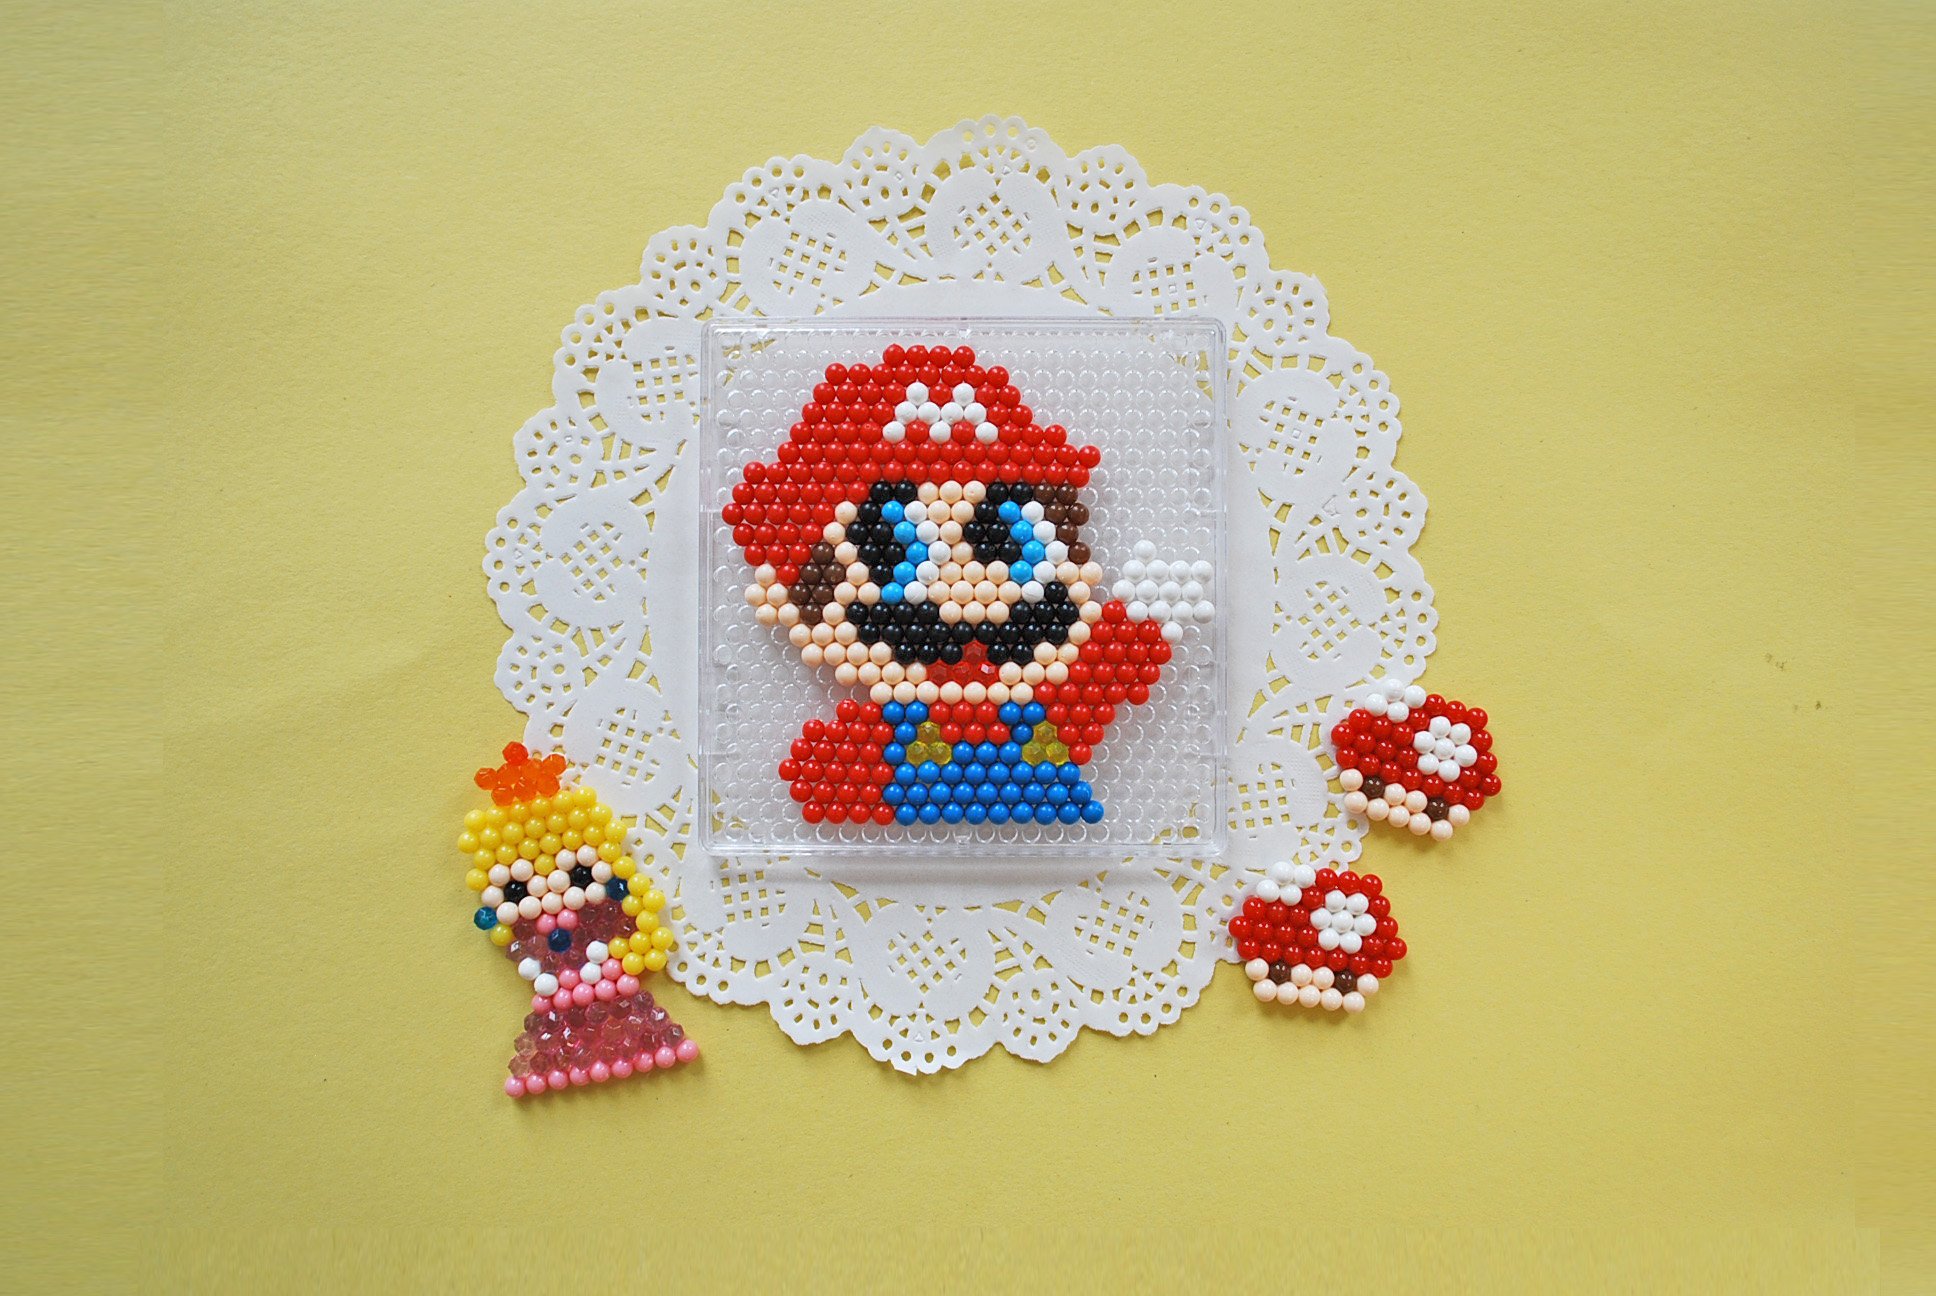 Aquabeads on X: It was Mario of course! It's Mario Time! RT